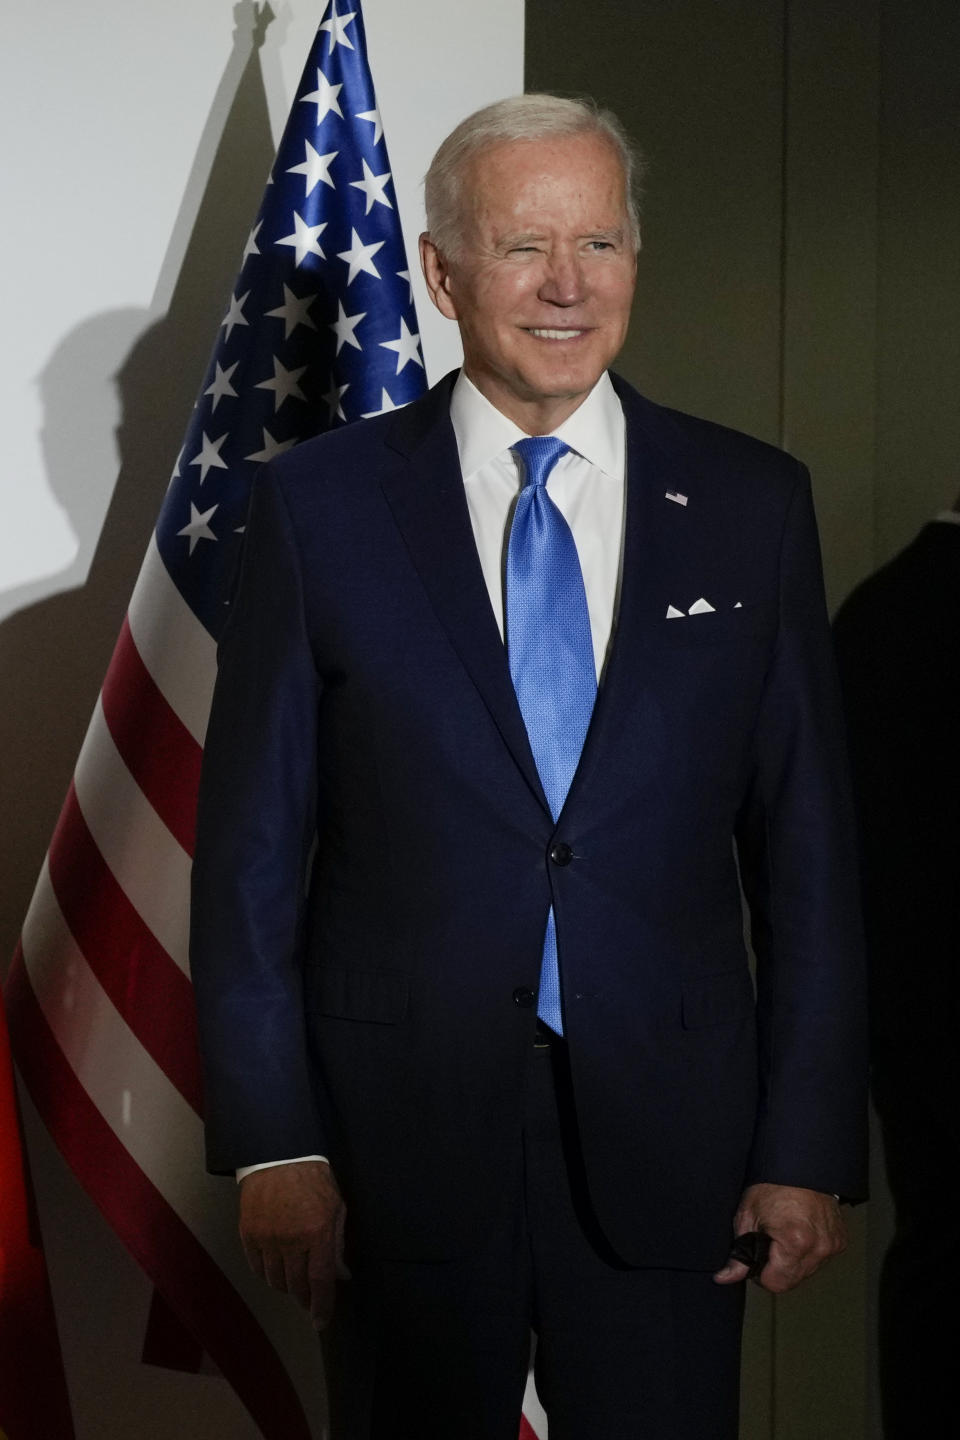 U.S. President Joe Biden smiles when posing for a picture at the La Nuvola conference center for the G20 summit in Rome, Saturday, Oct. 30, 2021. The two-day Group of 20 summit is the first in-person gathering of leaders of the world's biggest economies since the COVID-19 pandemic started. (AP Photo/Kirsty Wigglesworth, Pool)